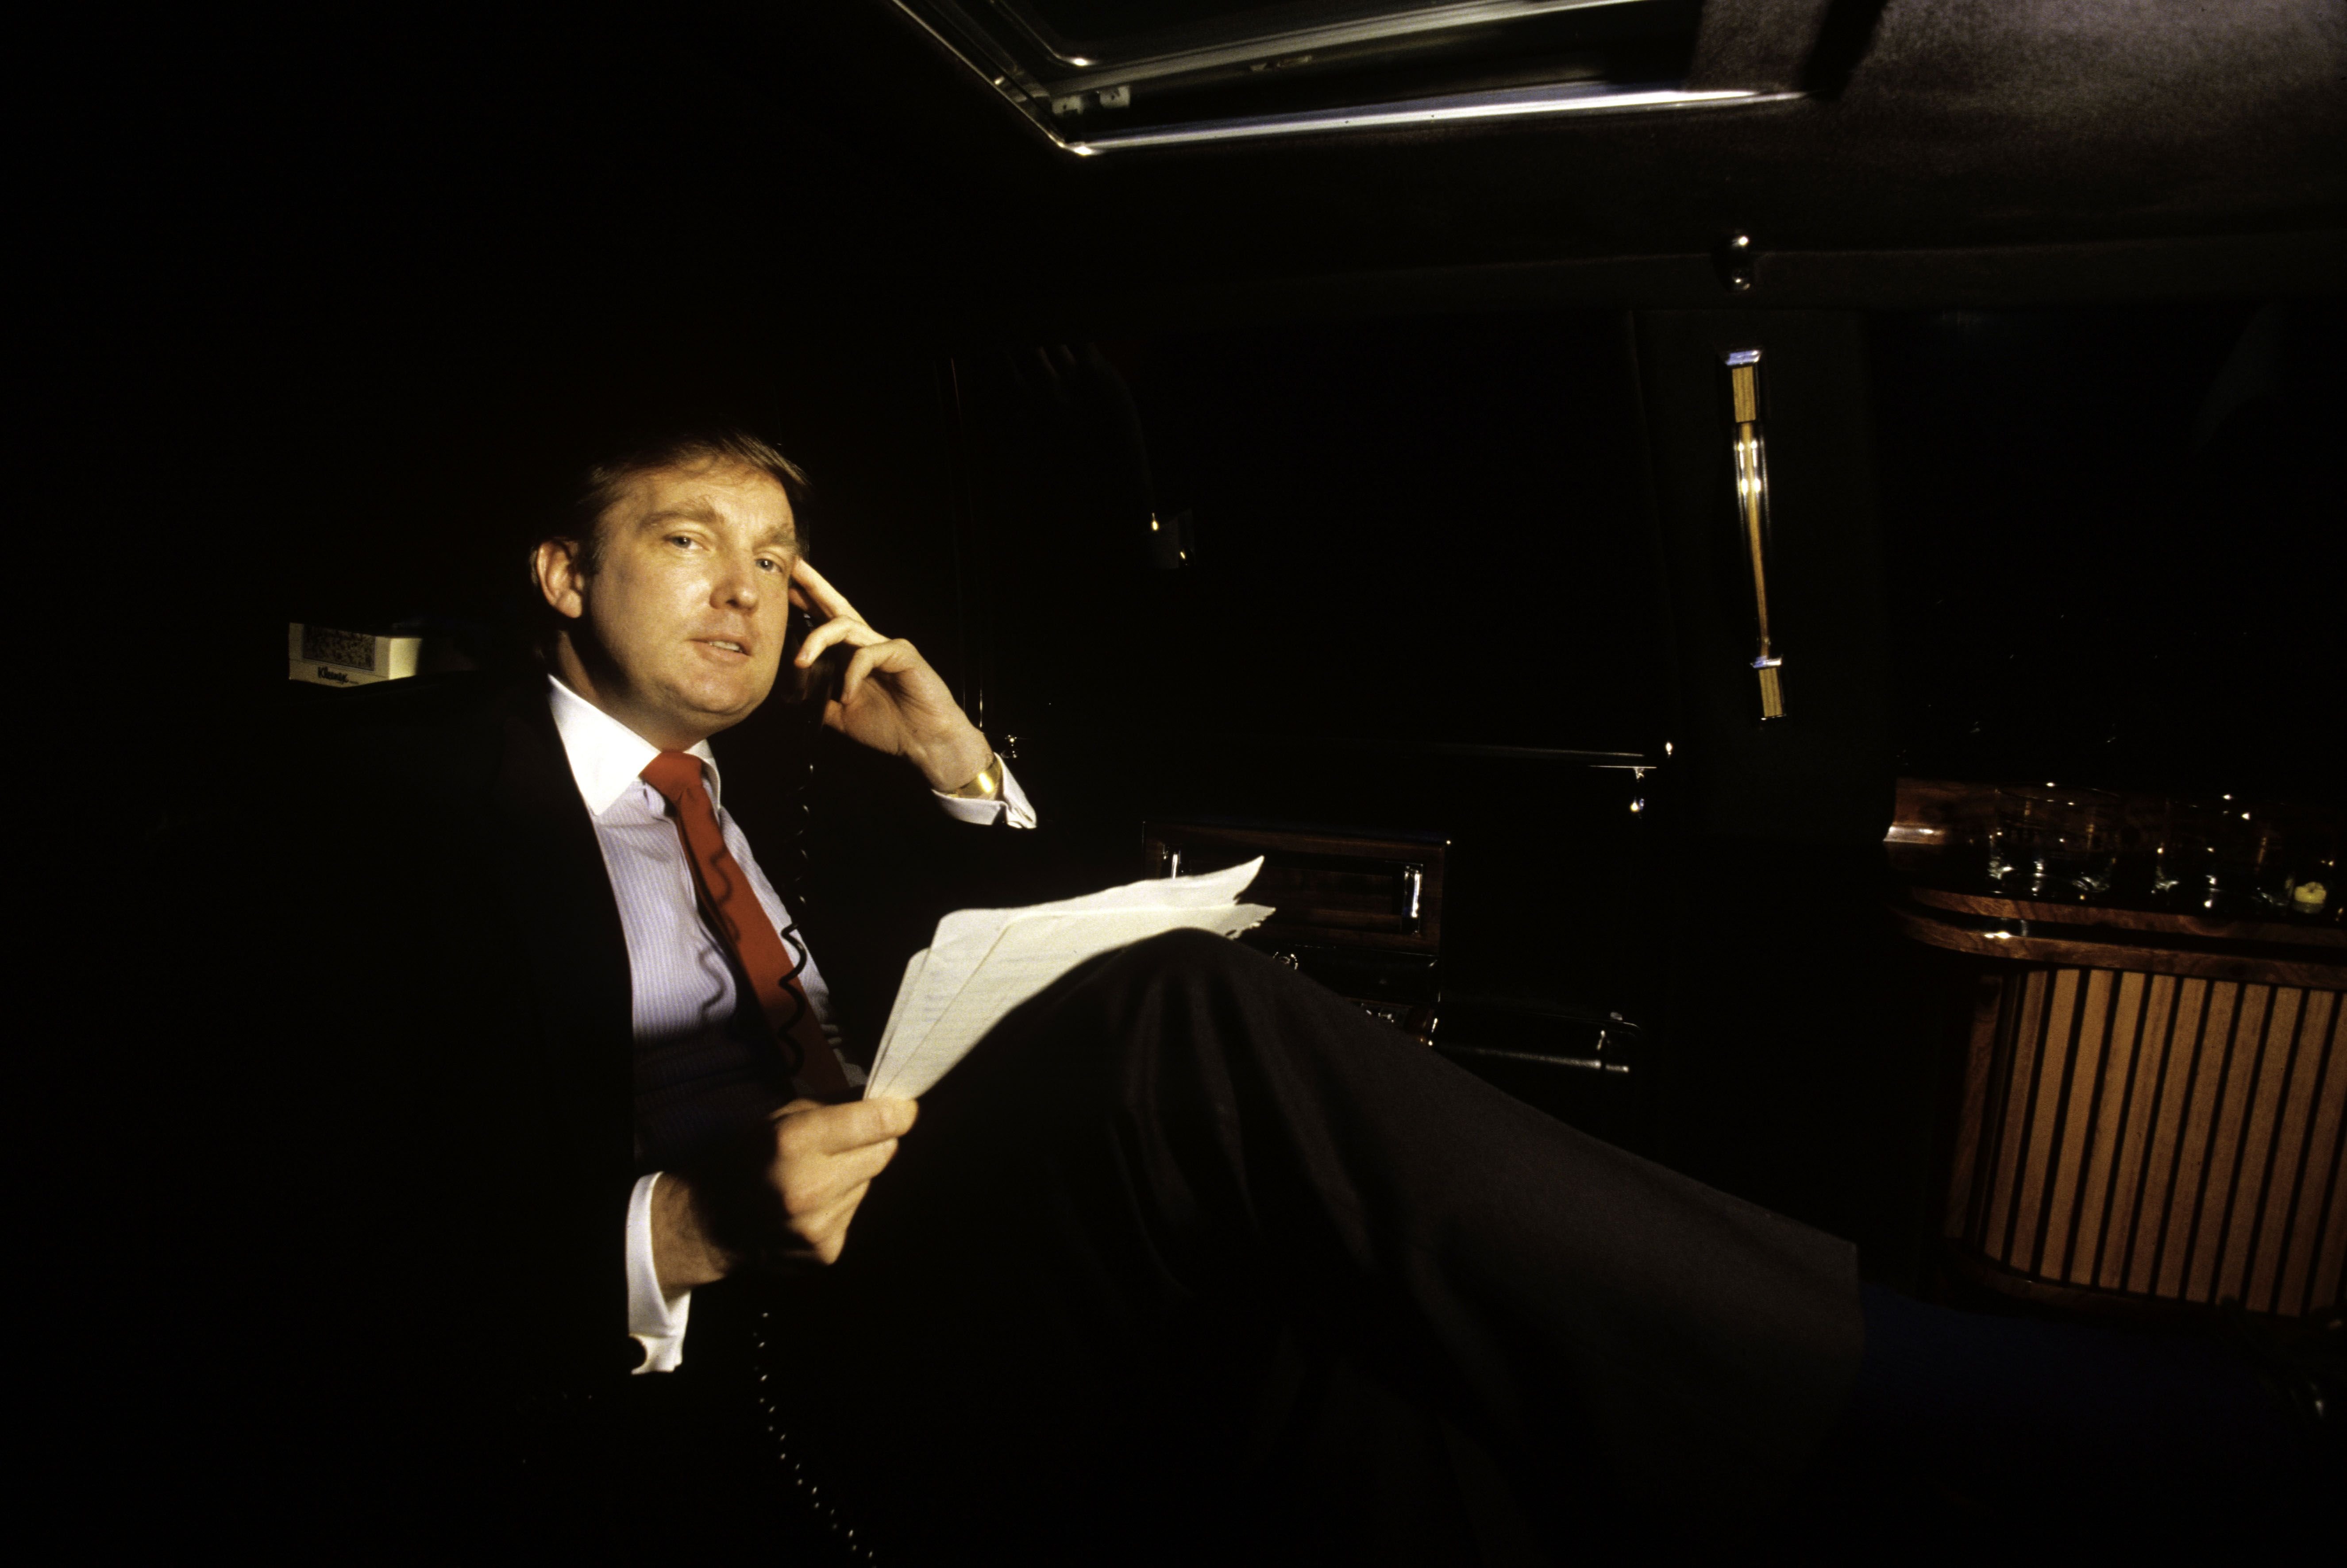 Donald Trump in his limousine, New York, circa 1985 | Source: Getty Images